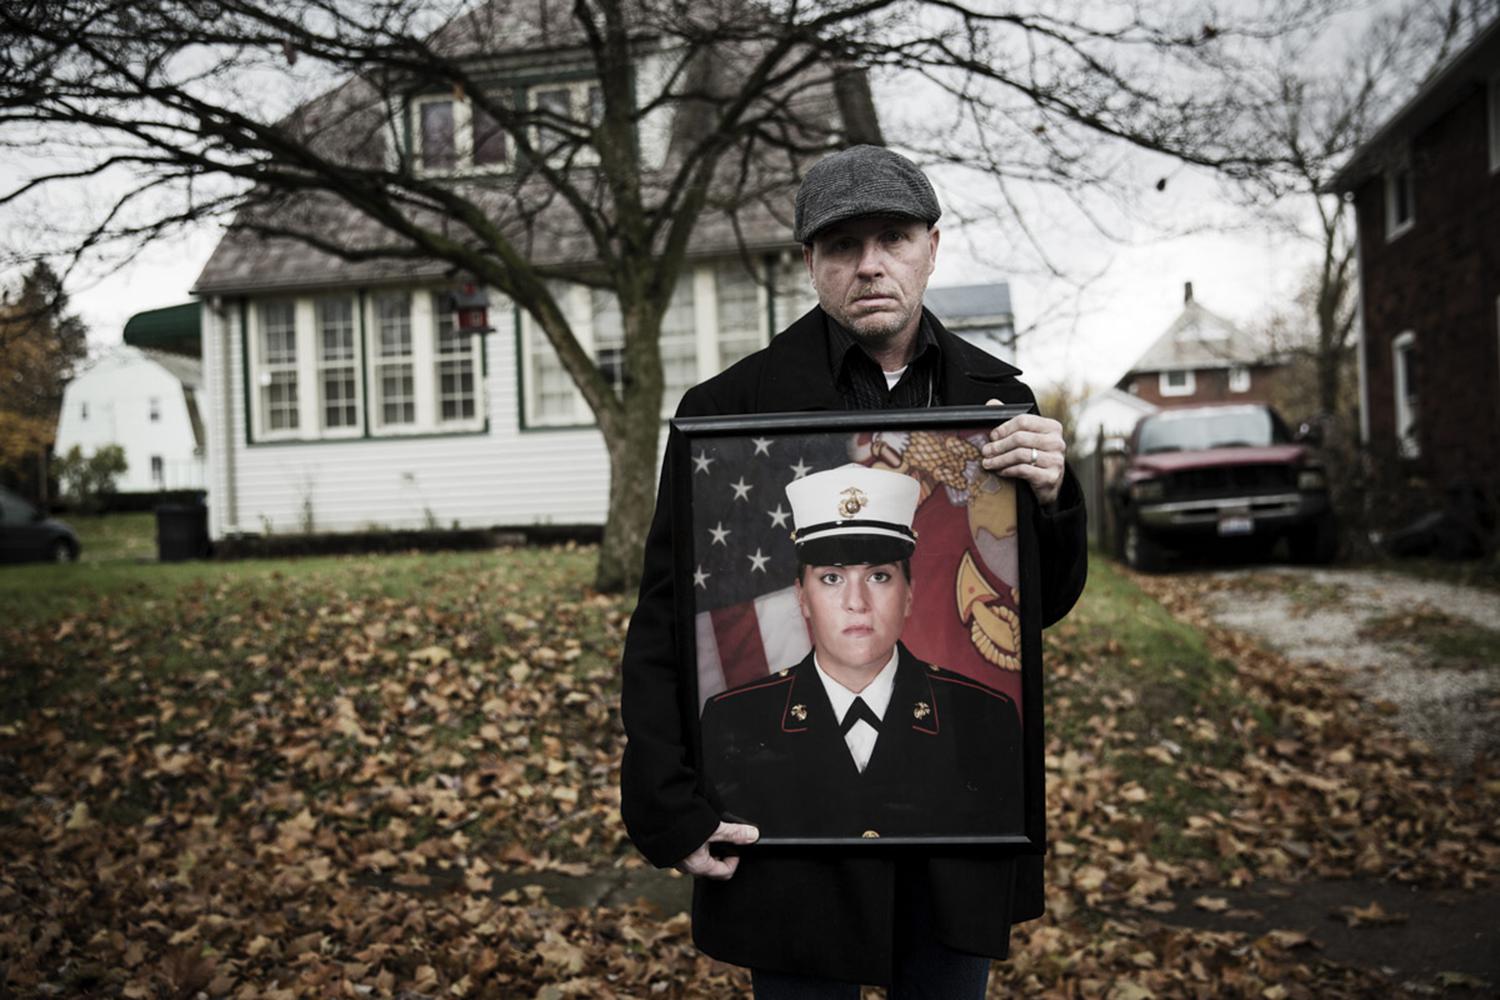 Gary Noling holding a photo of his daughter Carri Goodwin, a rape victim who died of acute alcohol intoxication less than a week after receiving an Other Than Honorable discharge from the Marines.